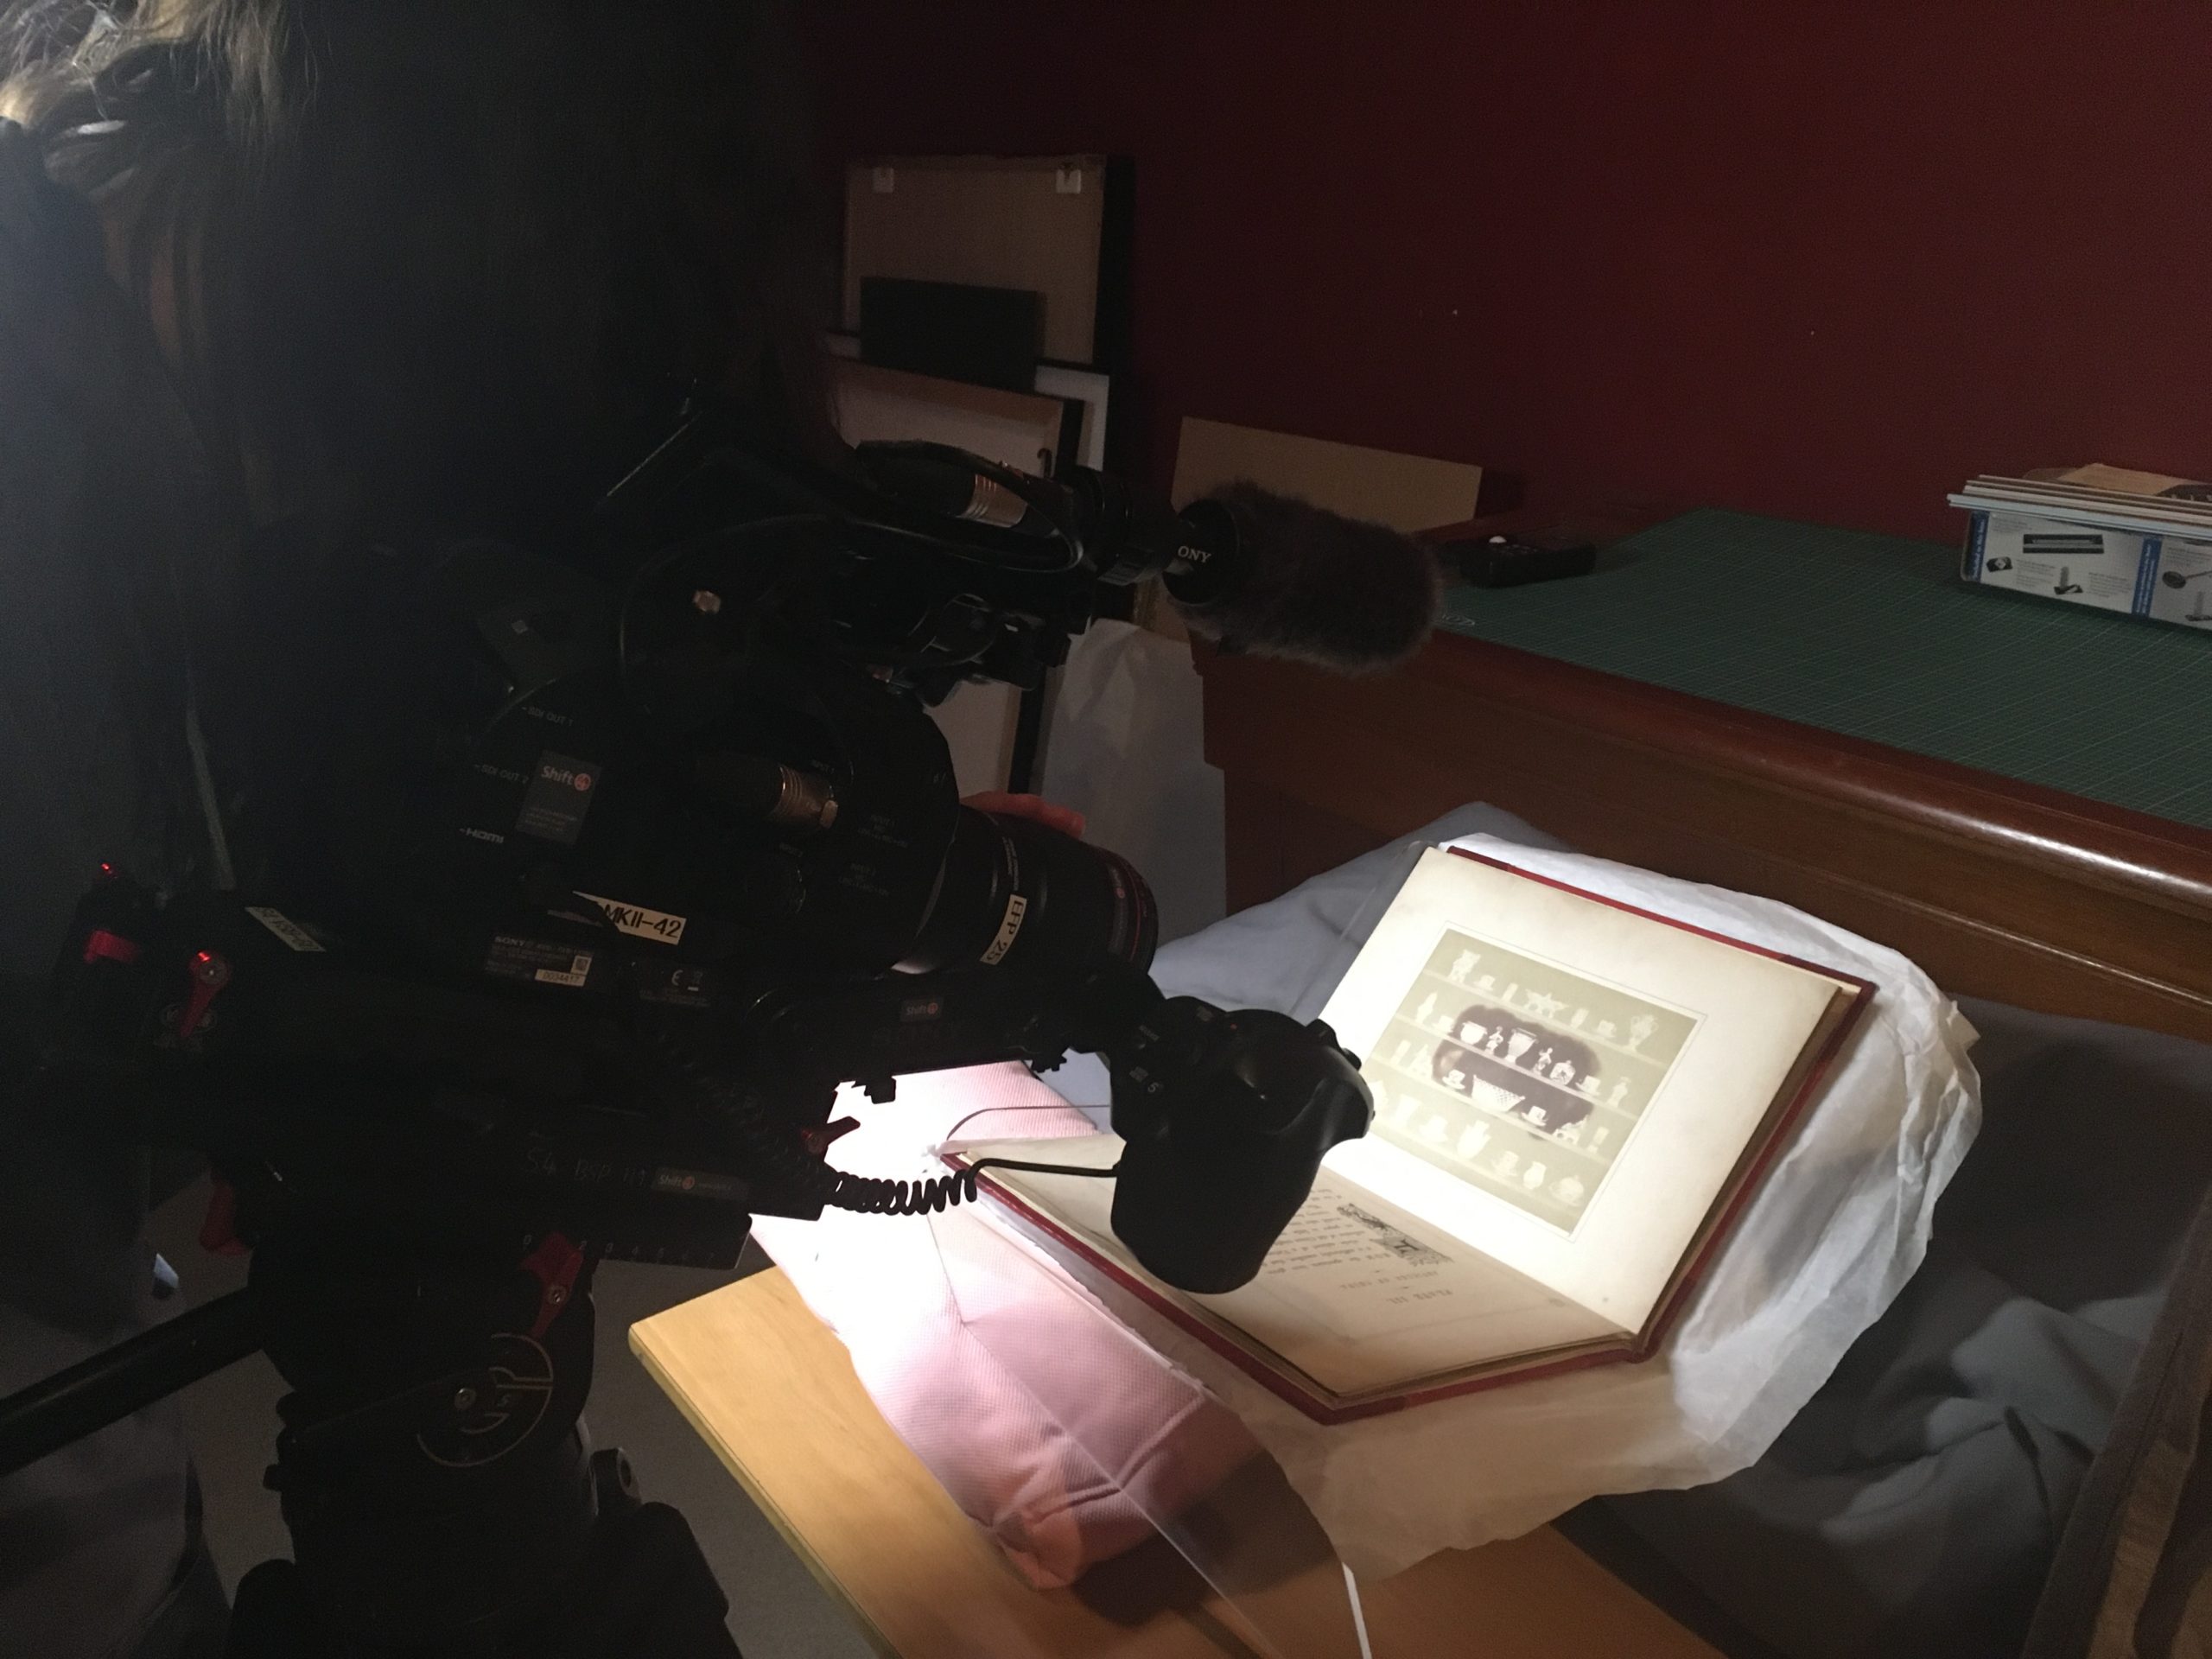 Special collection book being filmed by videographer in dark room.